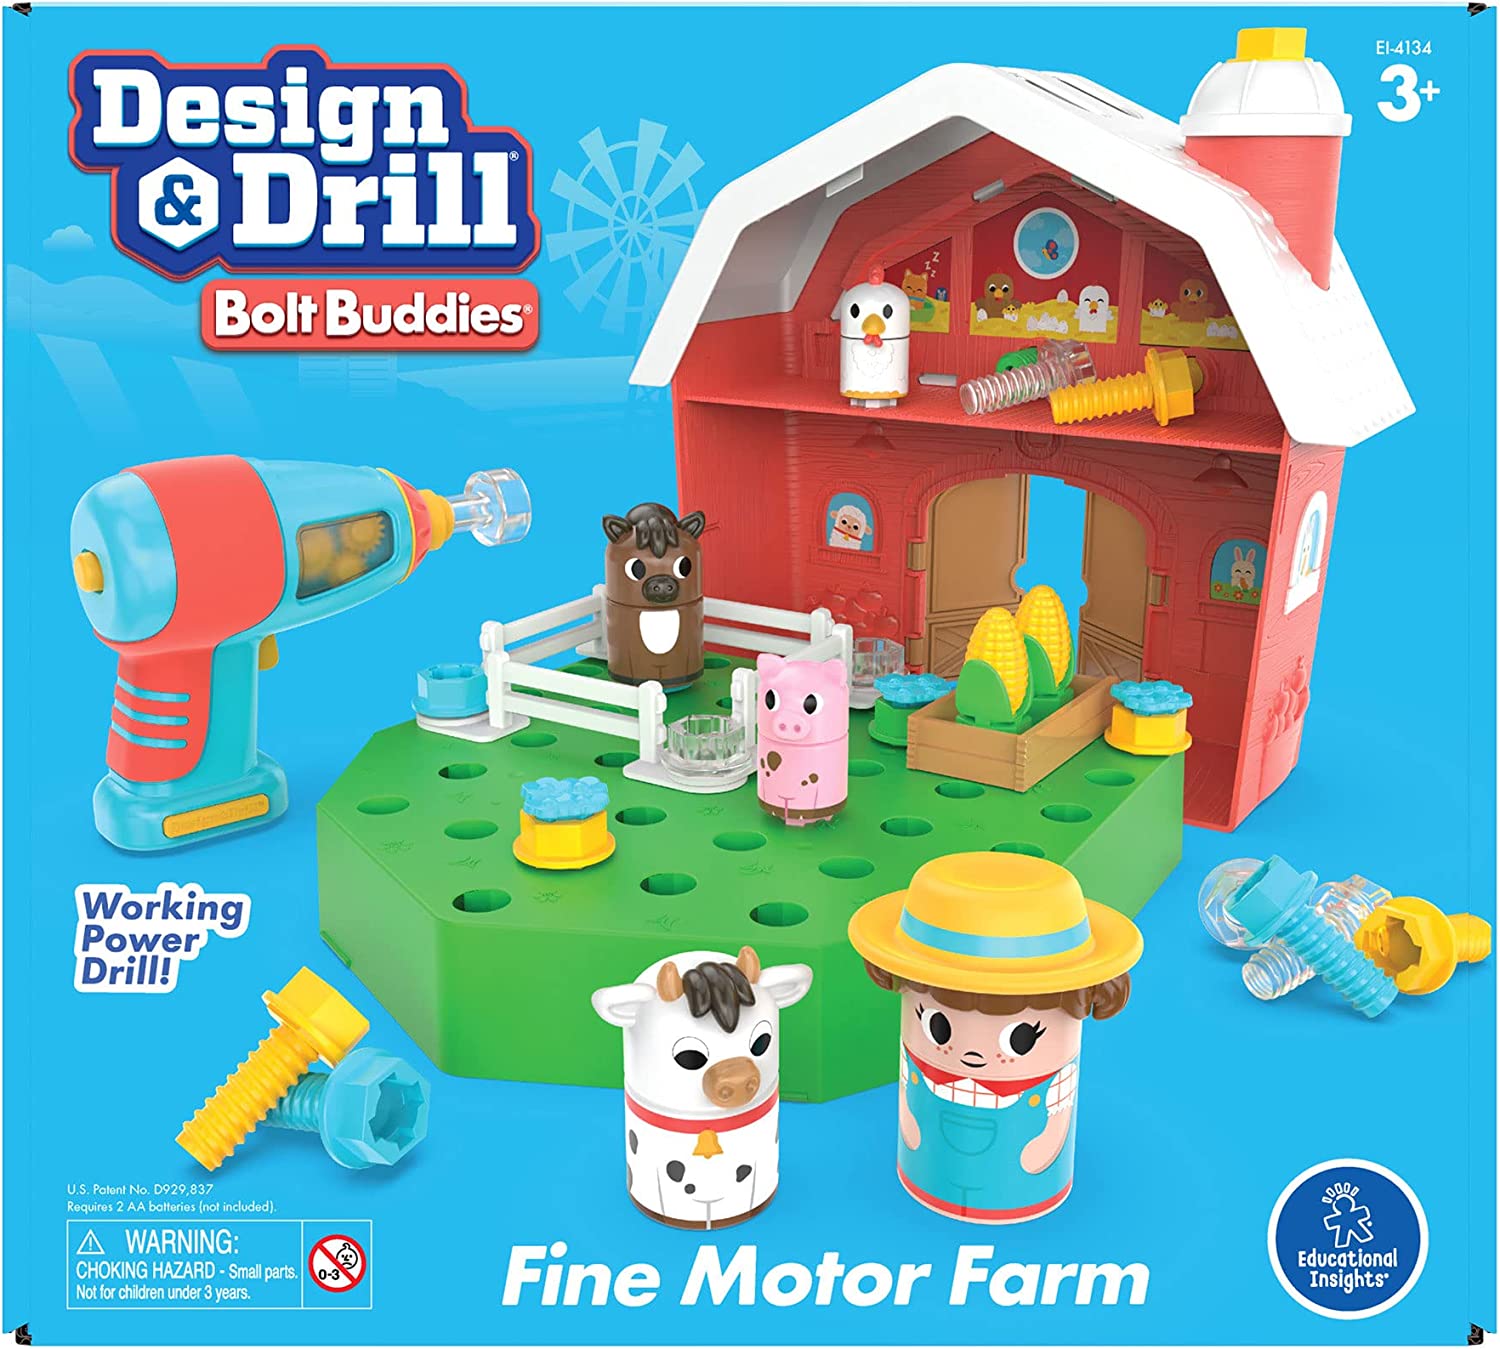 Design & Drill Bolt Buddies Farm Take Apart Toy with Electric Toy Drill, Preschool STEM Toy, Gifts for Boys & Girls, Ages 3+